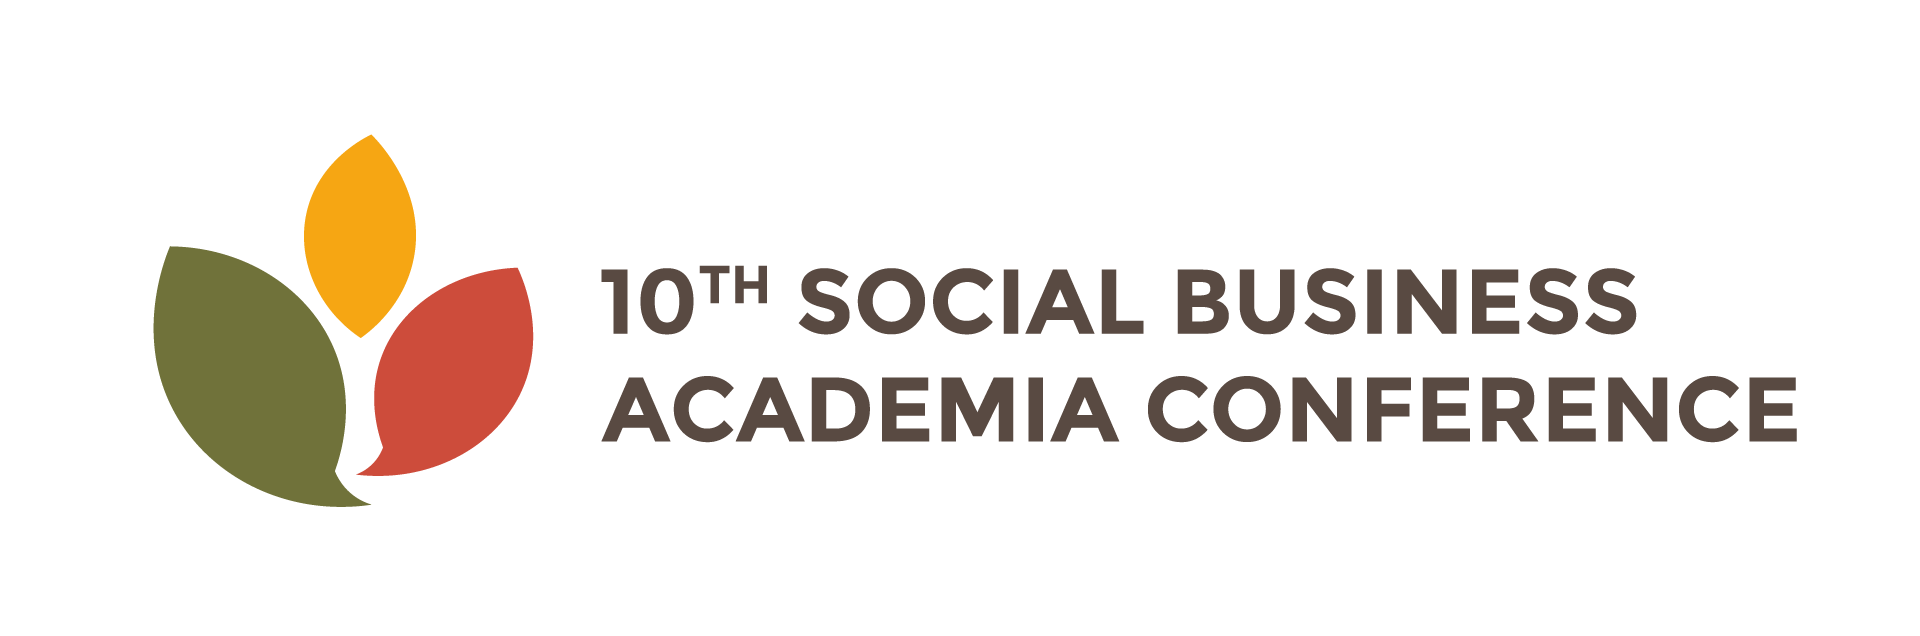 10th Social Business Academia Conference 2021